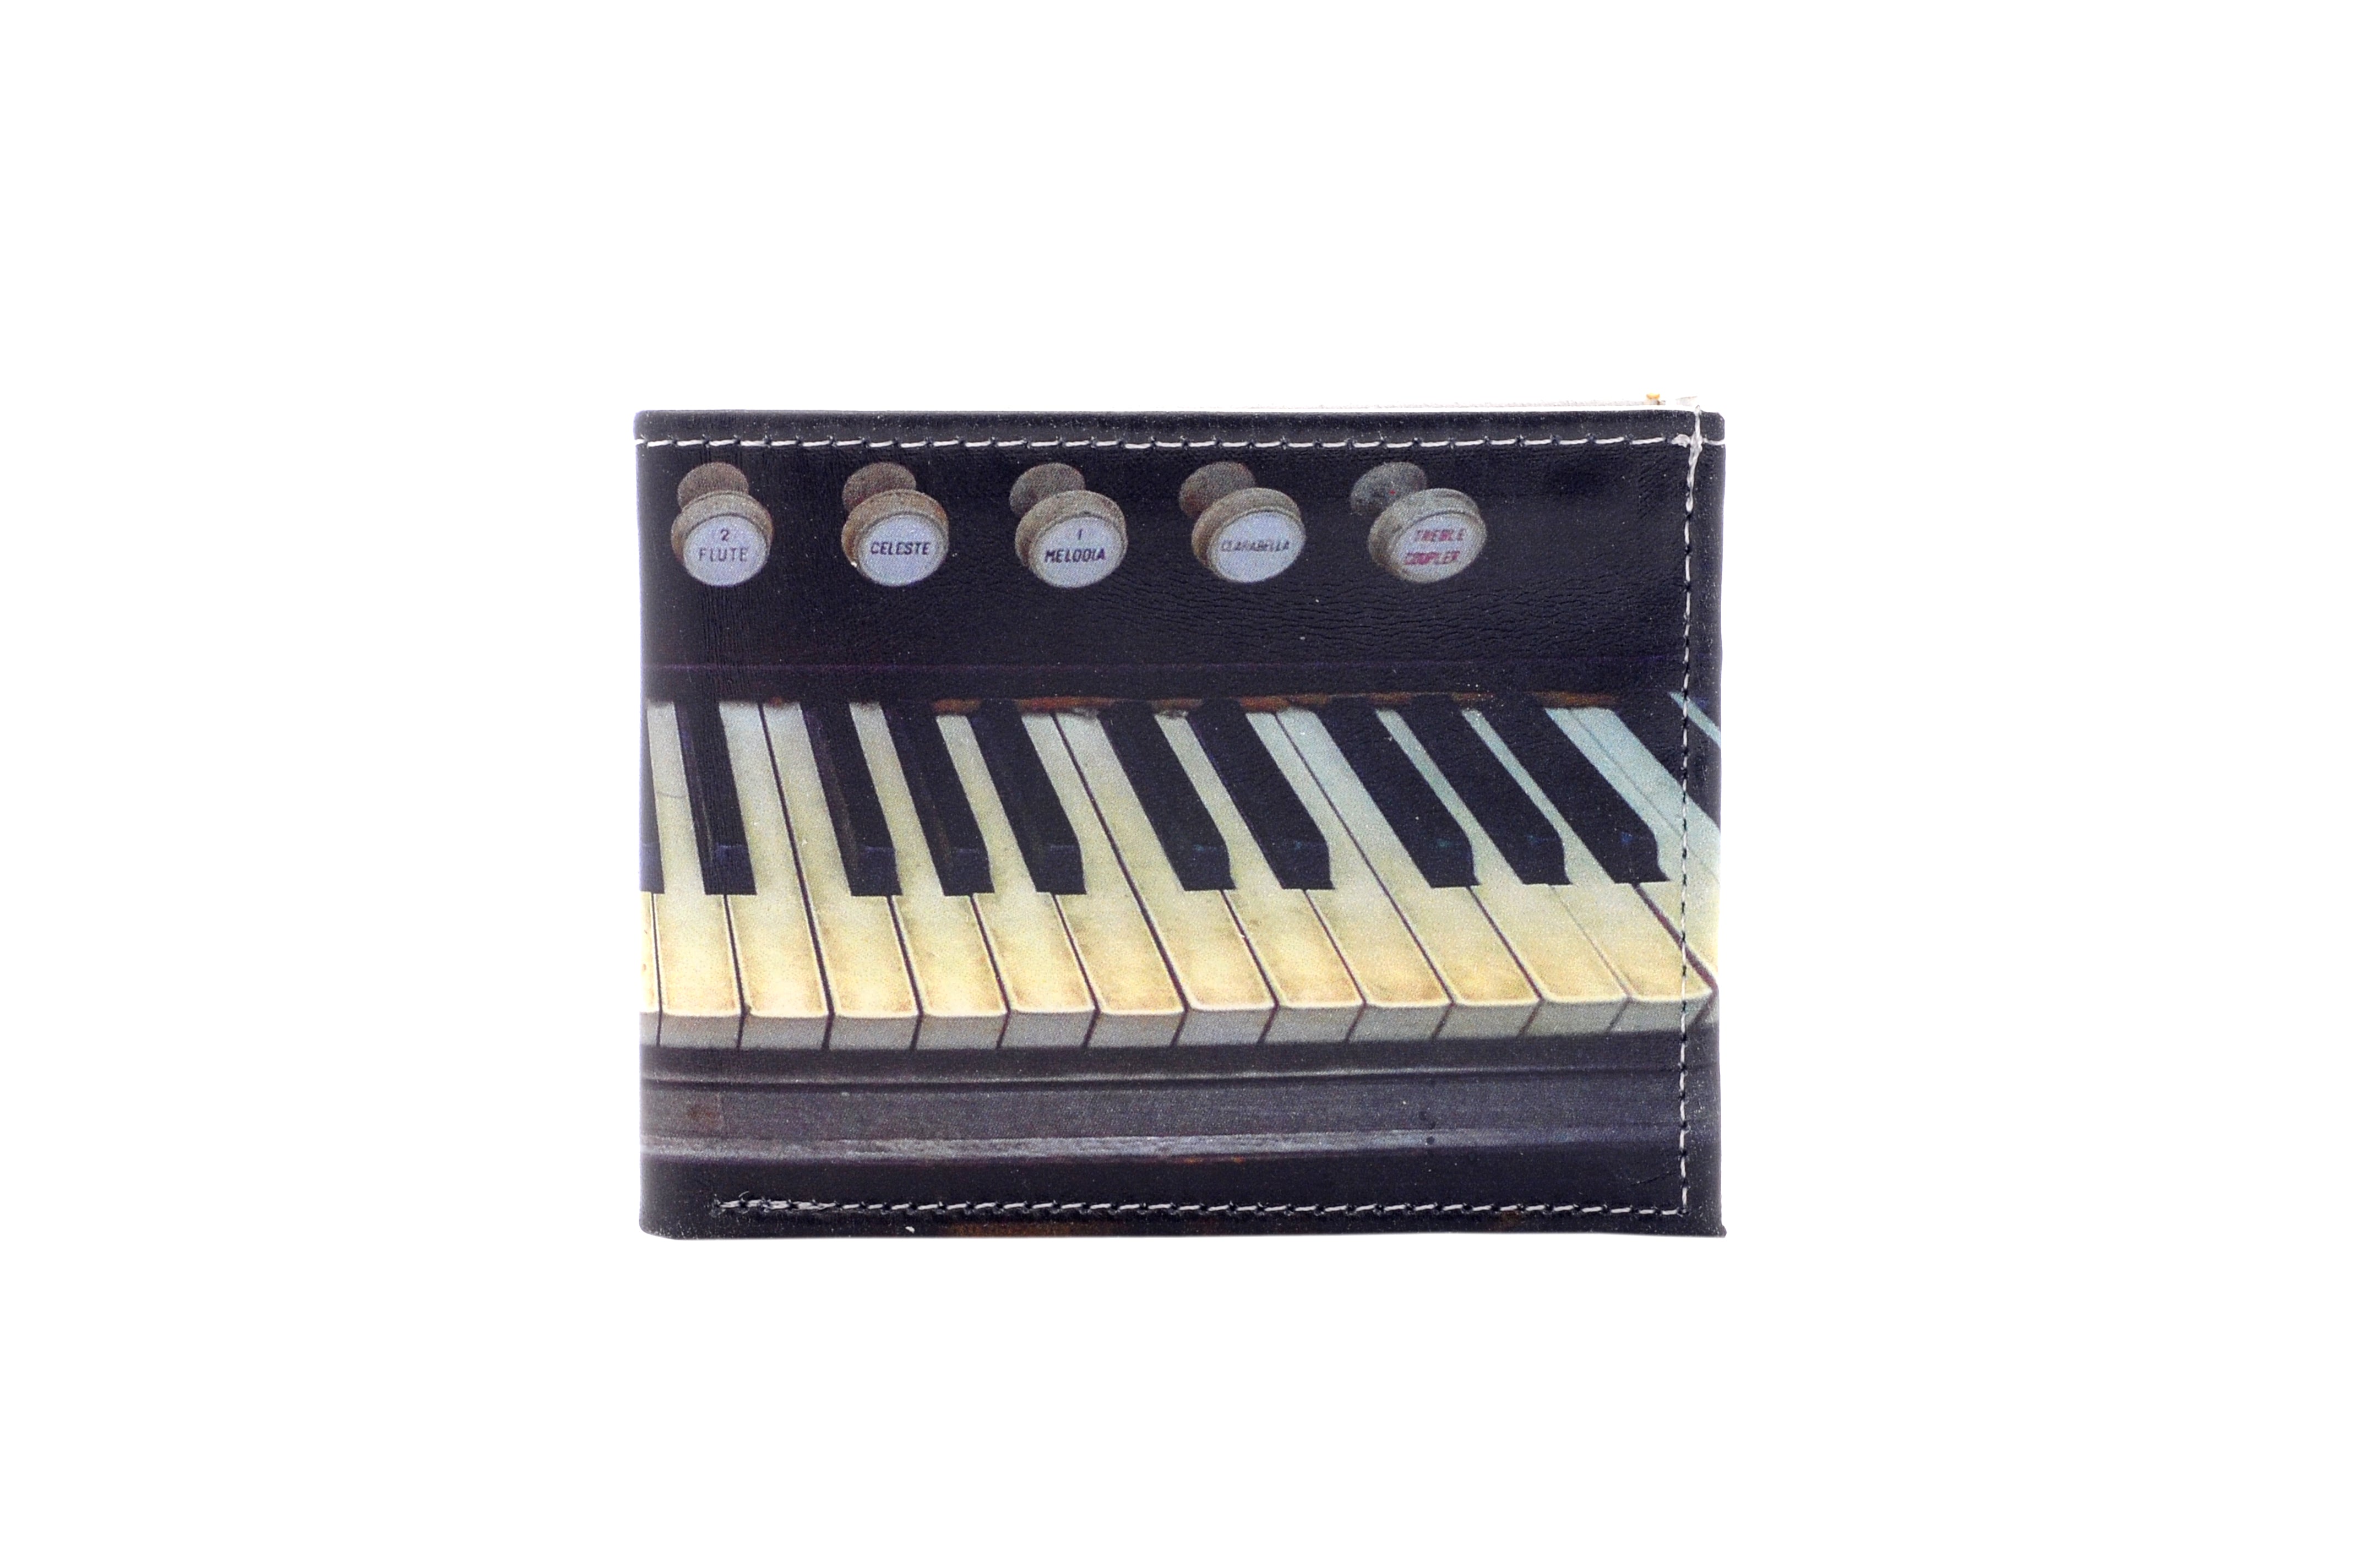 Leather Wallets - Organ - Photography